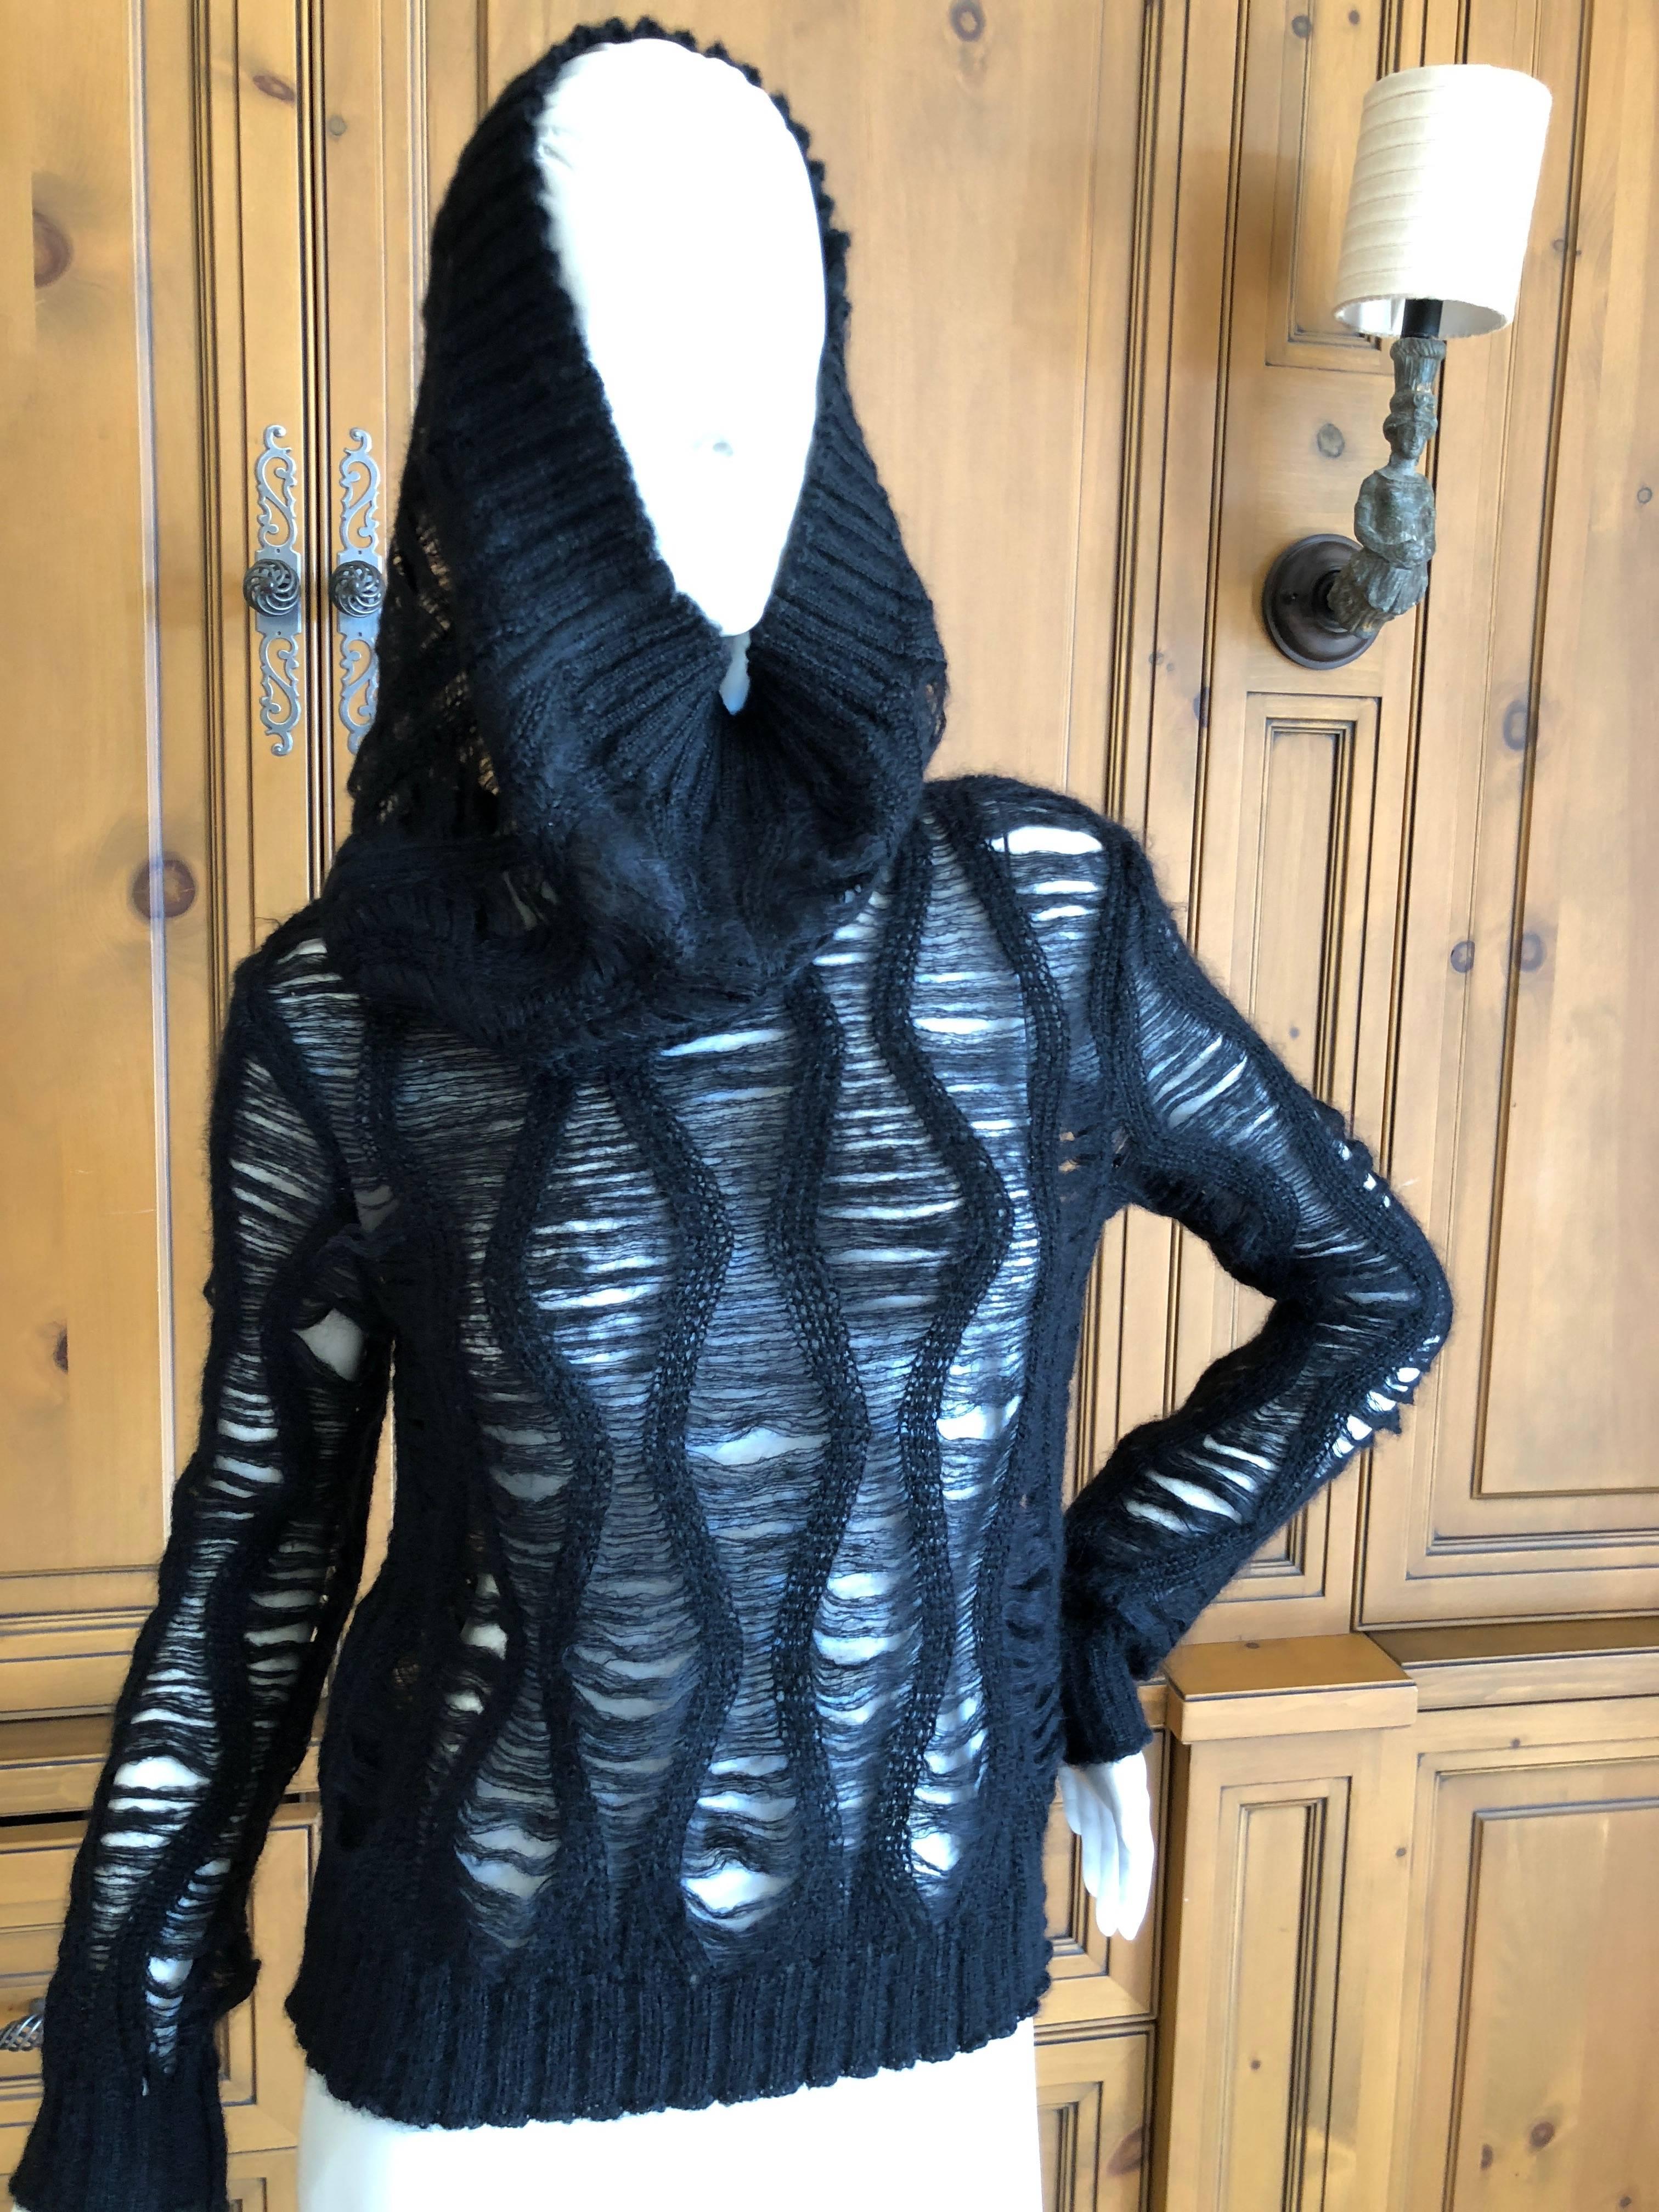 Rare Christian Dior by Galliano Black Mohair Open Weave Cowl Neck Sweater 
Bust 36